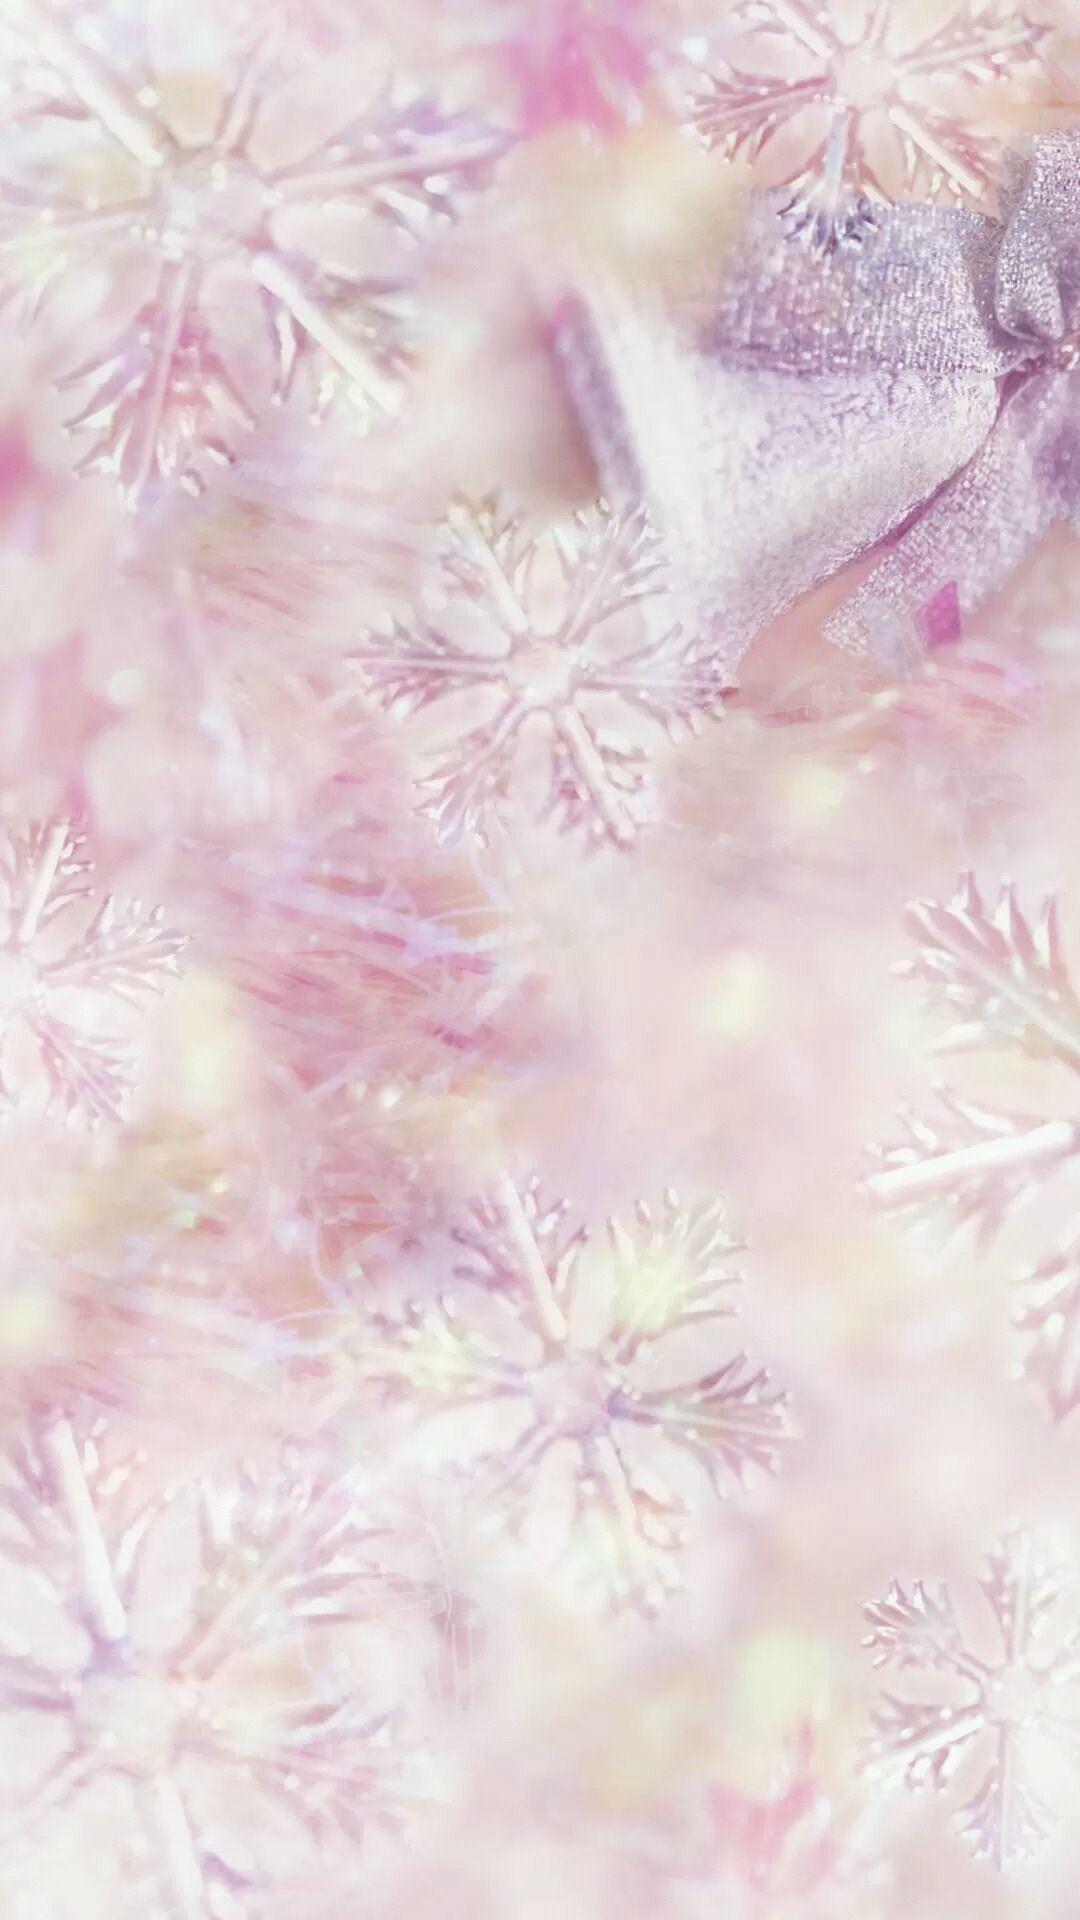 Dremy snowflakes. iPhone wallpaper winter, Wallpaper iphone christmas, Winter wallpaper